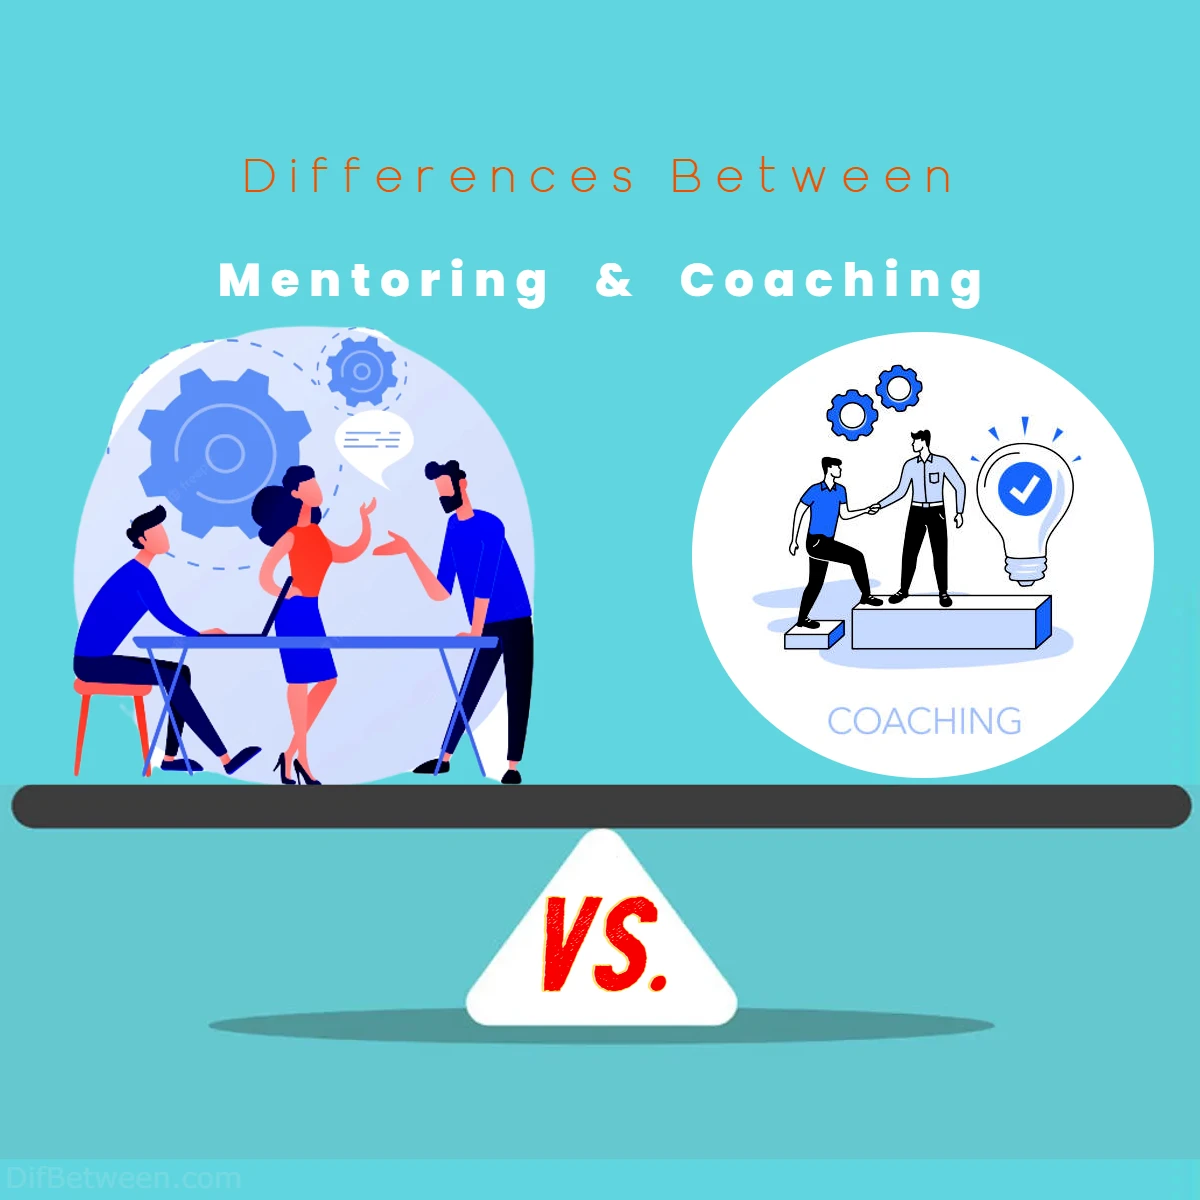 Differences Between Mentoring vs Coaching